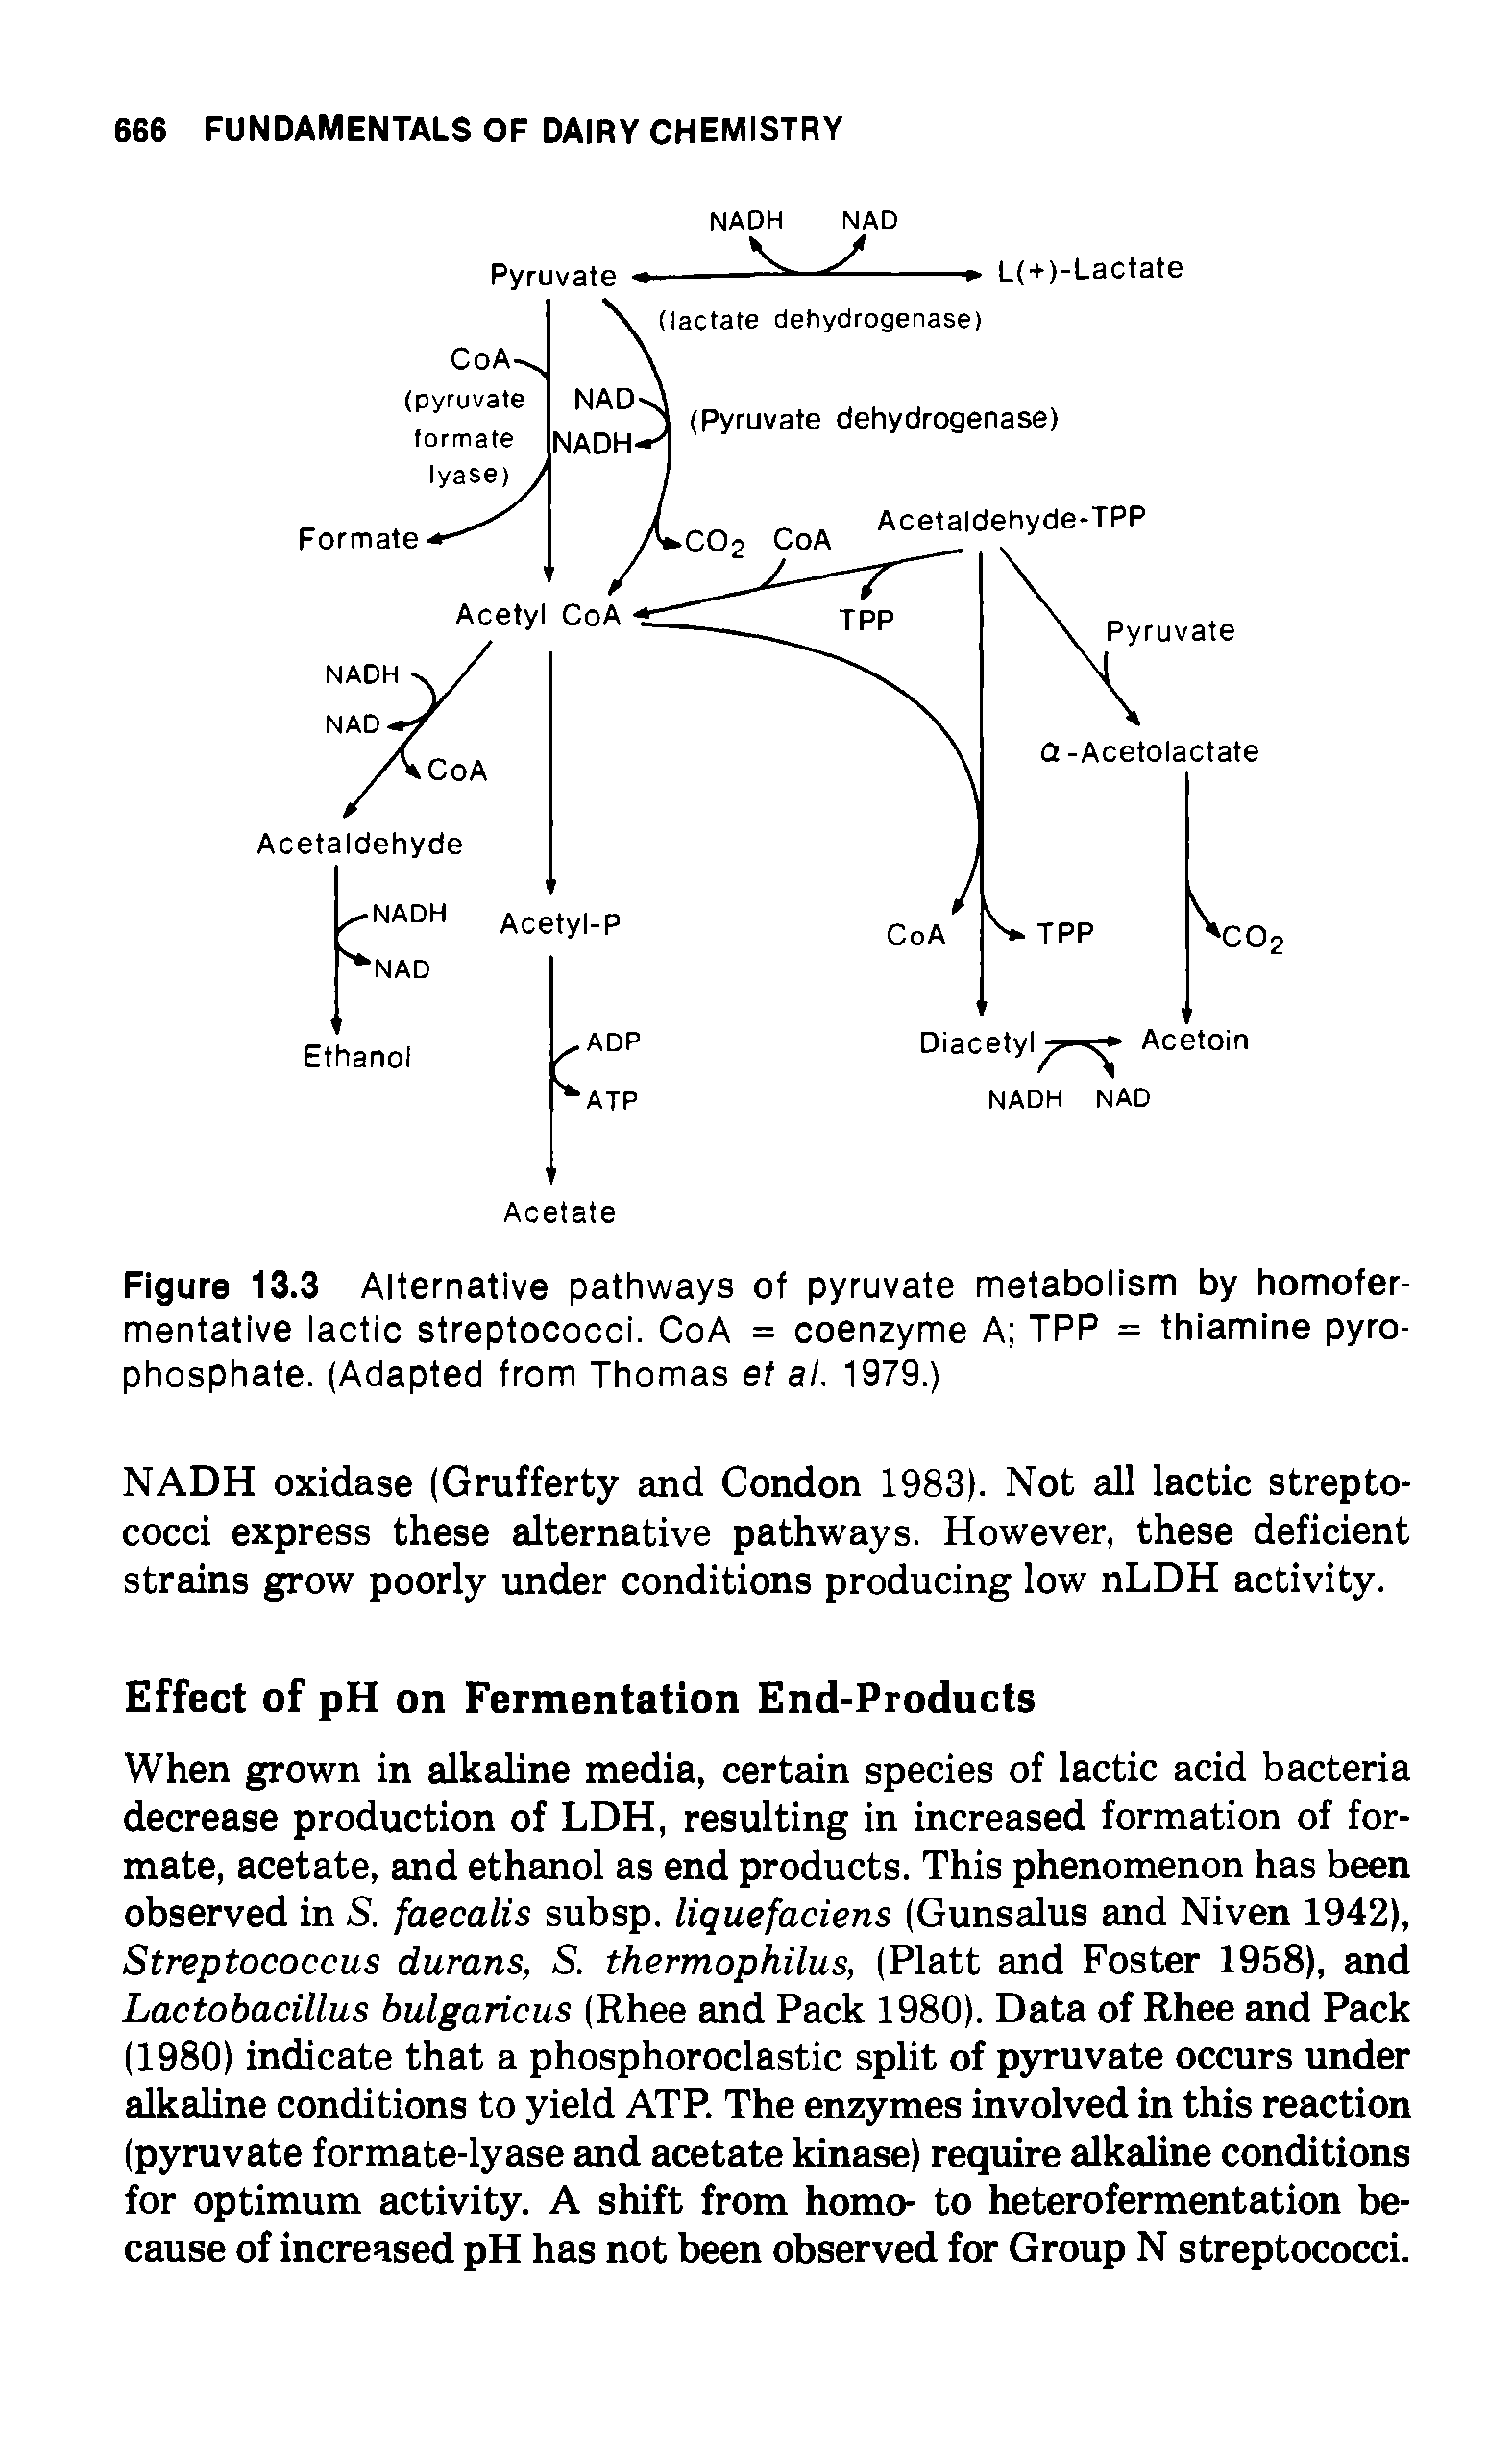 Figure 13.3 Alternative pathways of pyruvate metabolism by homofer-mentative lactic streptococci. CoA = coenzyme A TPP = thiamine pyrophosphate. (Adapted from Thomas et at. 1979.)...